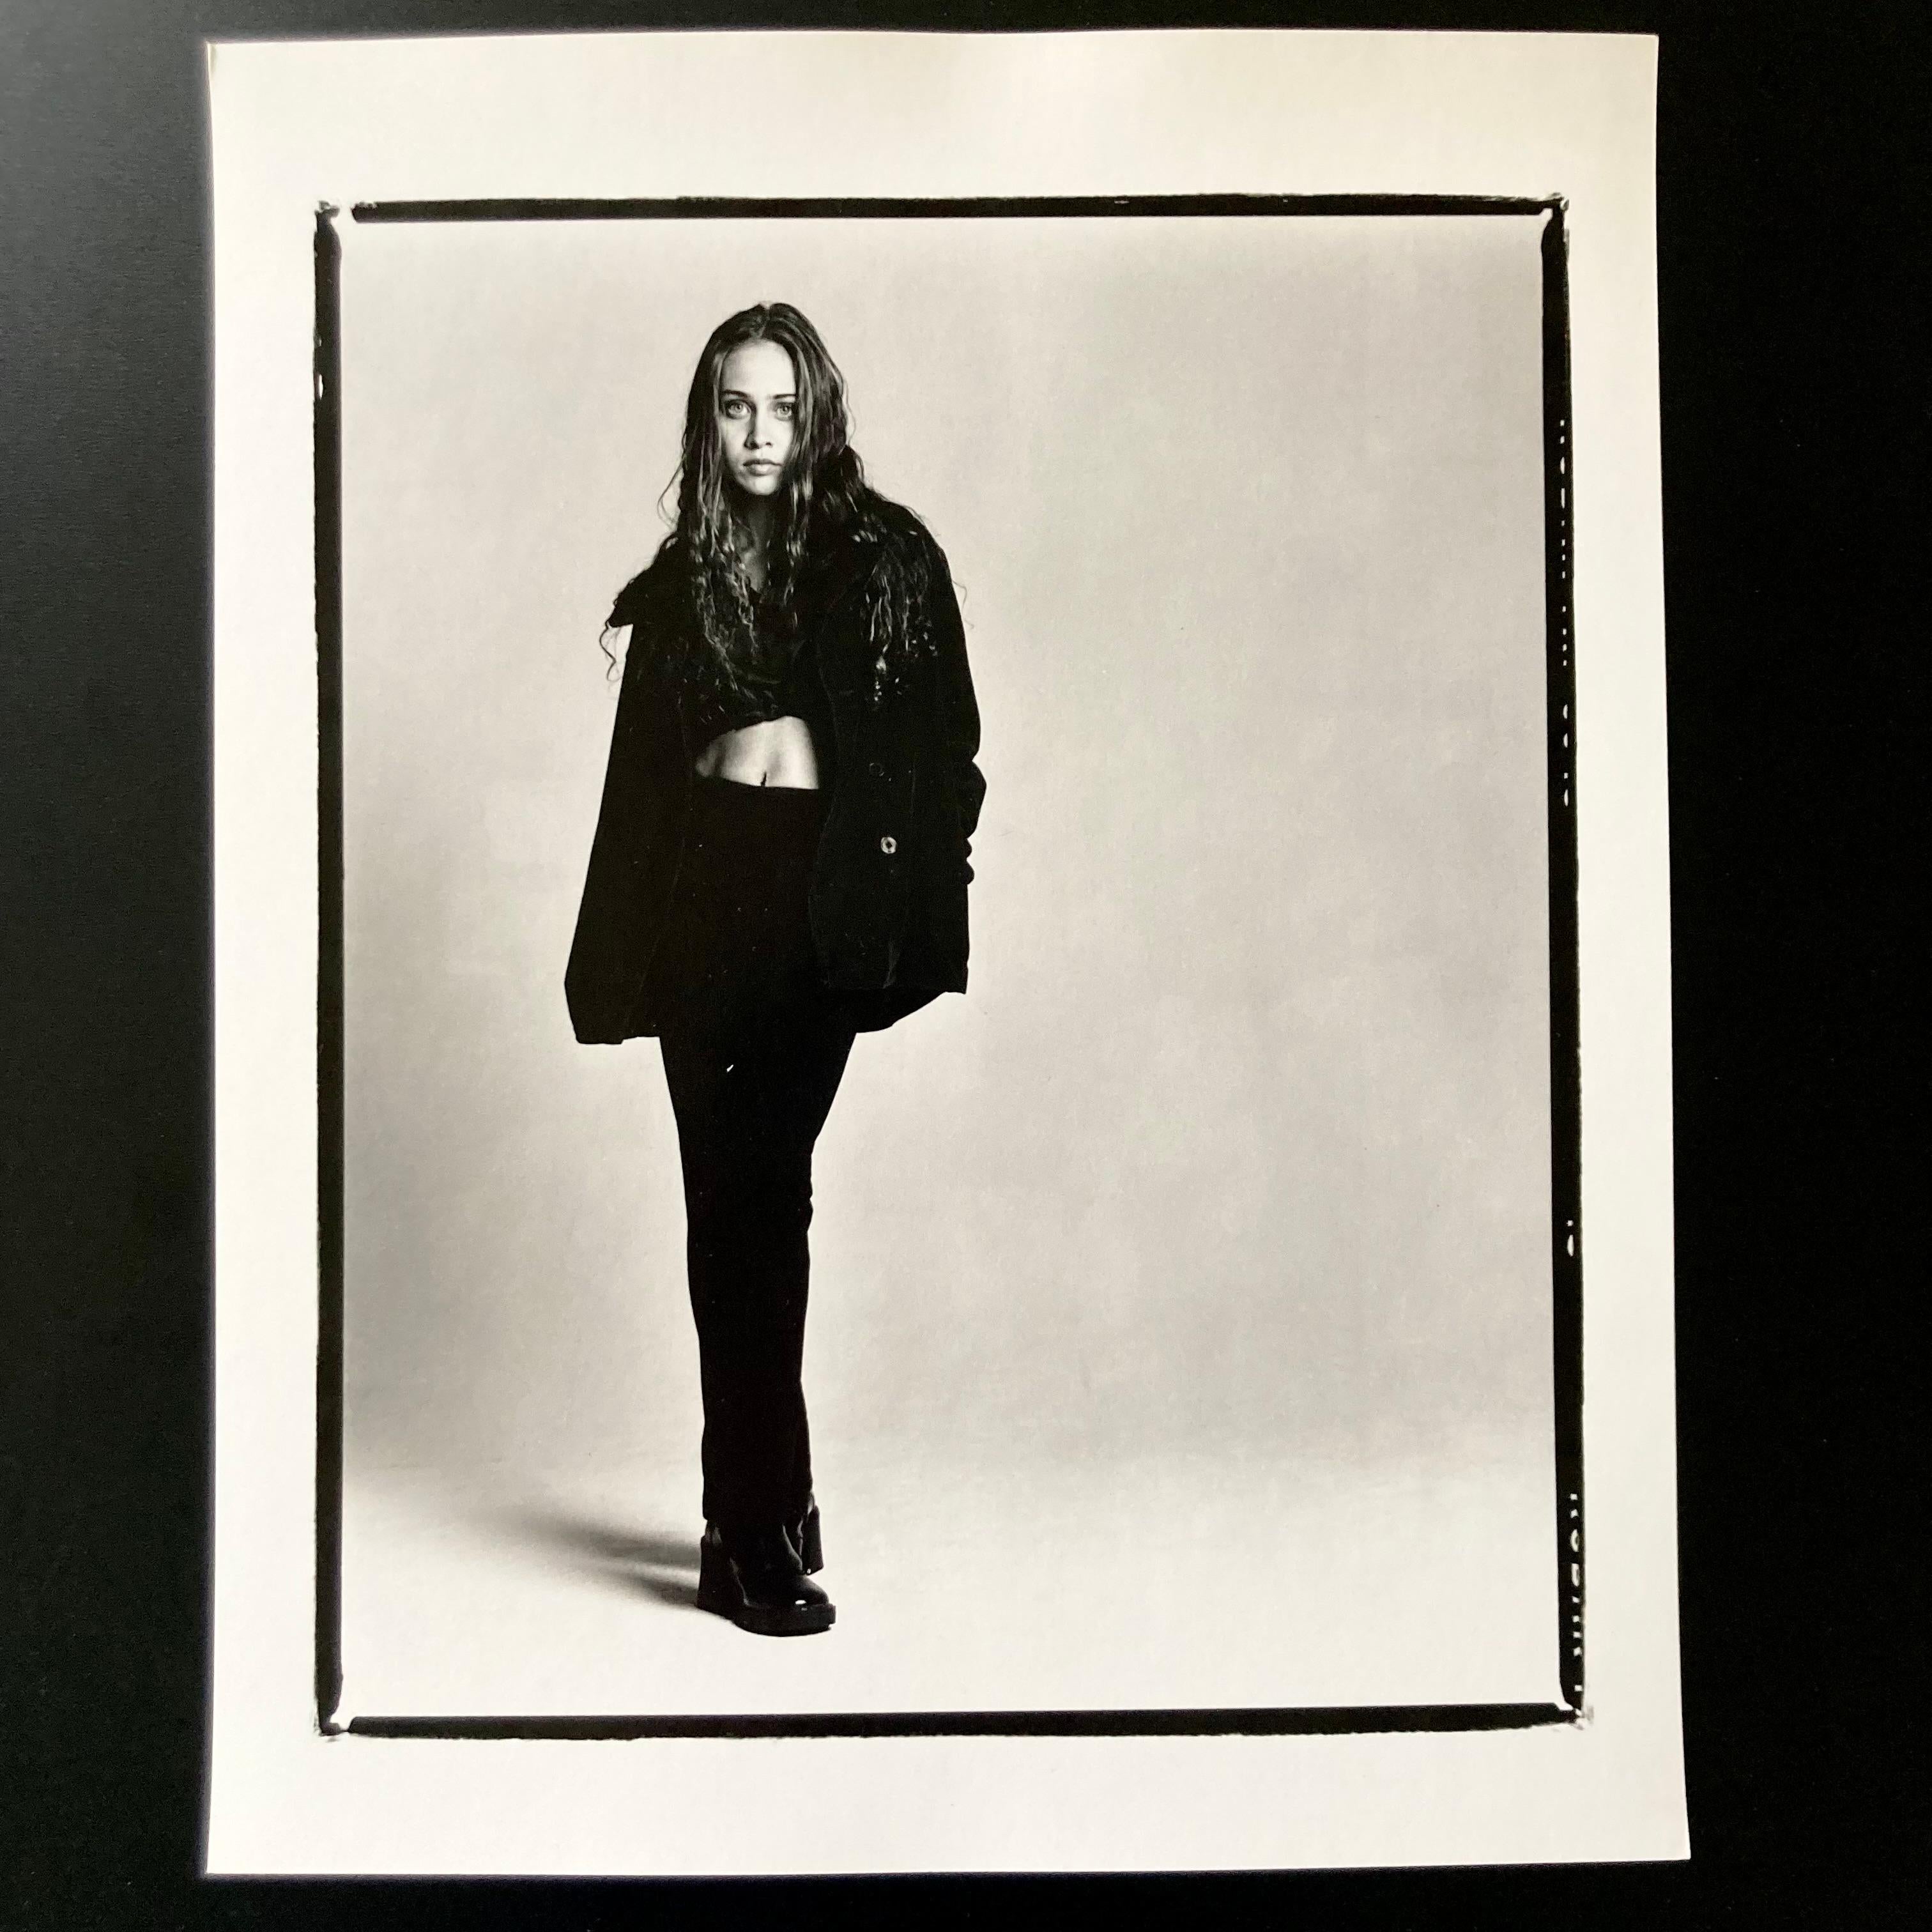 Singer Fiona Apple, 8”x10” Hand-printed darkroom print, made at the time of the shoot in 1996, and stored flat in a temperature-controlled environment.

The print is in perfect new condition with no flaws. Hand-signed on the back in pencil by Chris